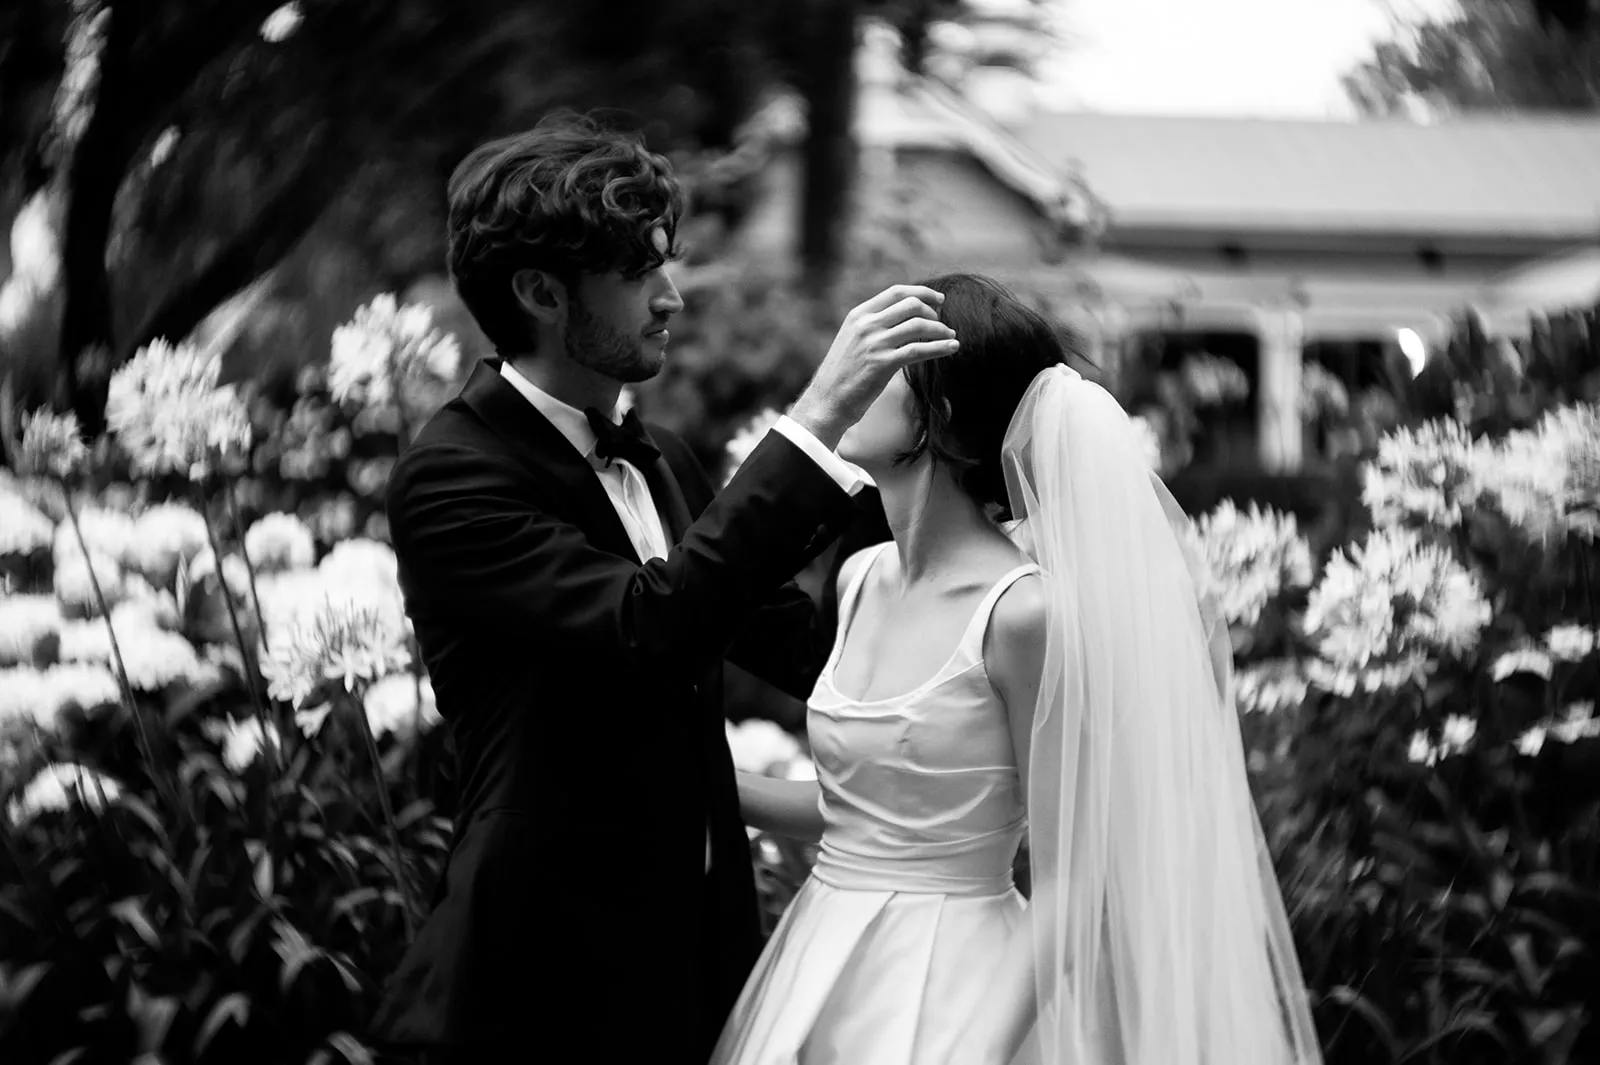 A black-and-white photo of a bride and groom in a garden. The groom, in a dark suit, gently adjusts the bride's hair. The bride, in a white gown with a long veil, looks up at him. Surrounding them are blurred flowers and foliage, with a building faintly visible in the background.